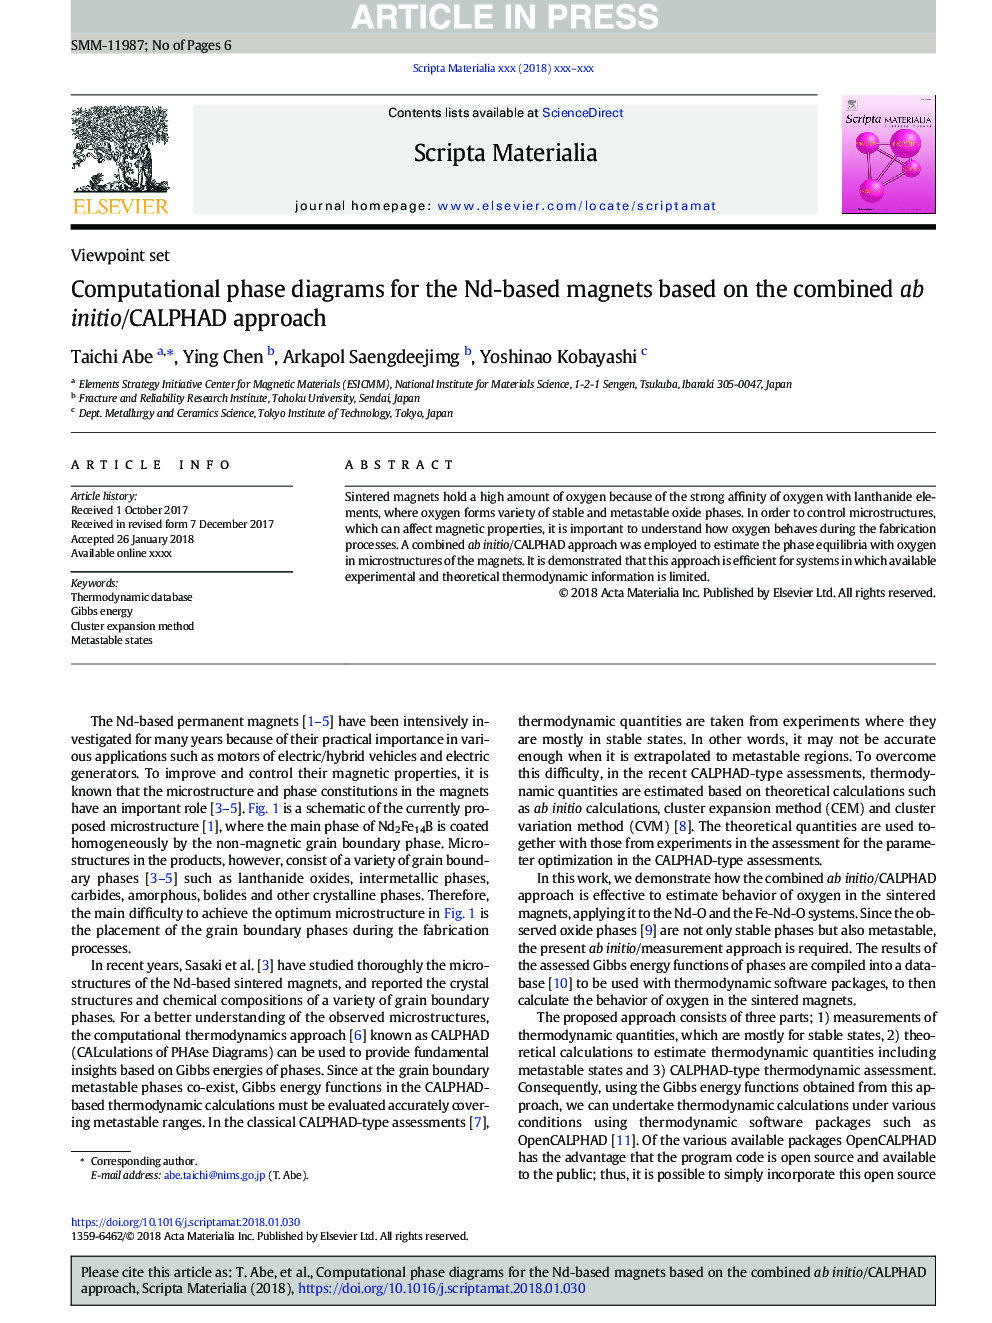 Computational phase diagrams for the Nd-based magnets based on the combined ab initio/CALPHAD approach